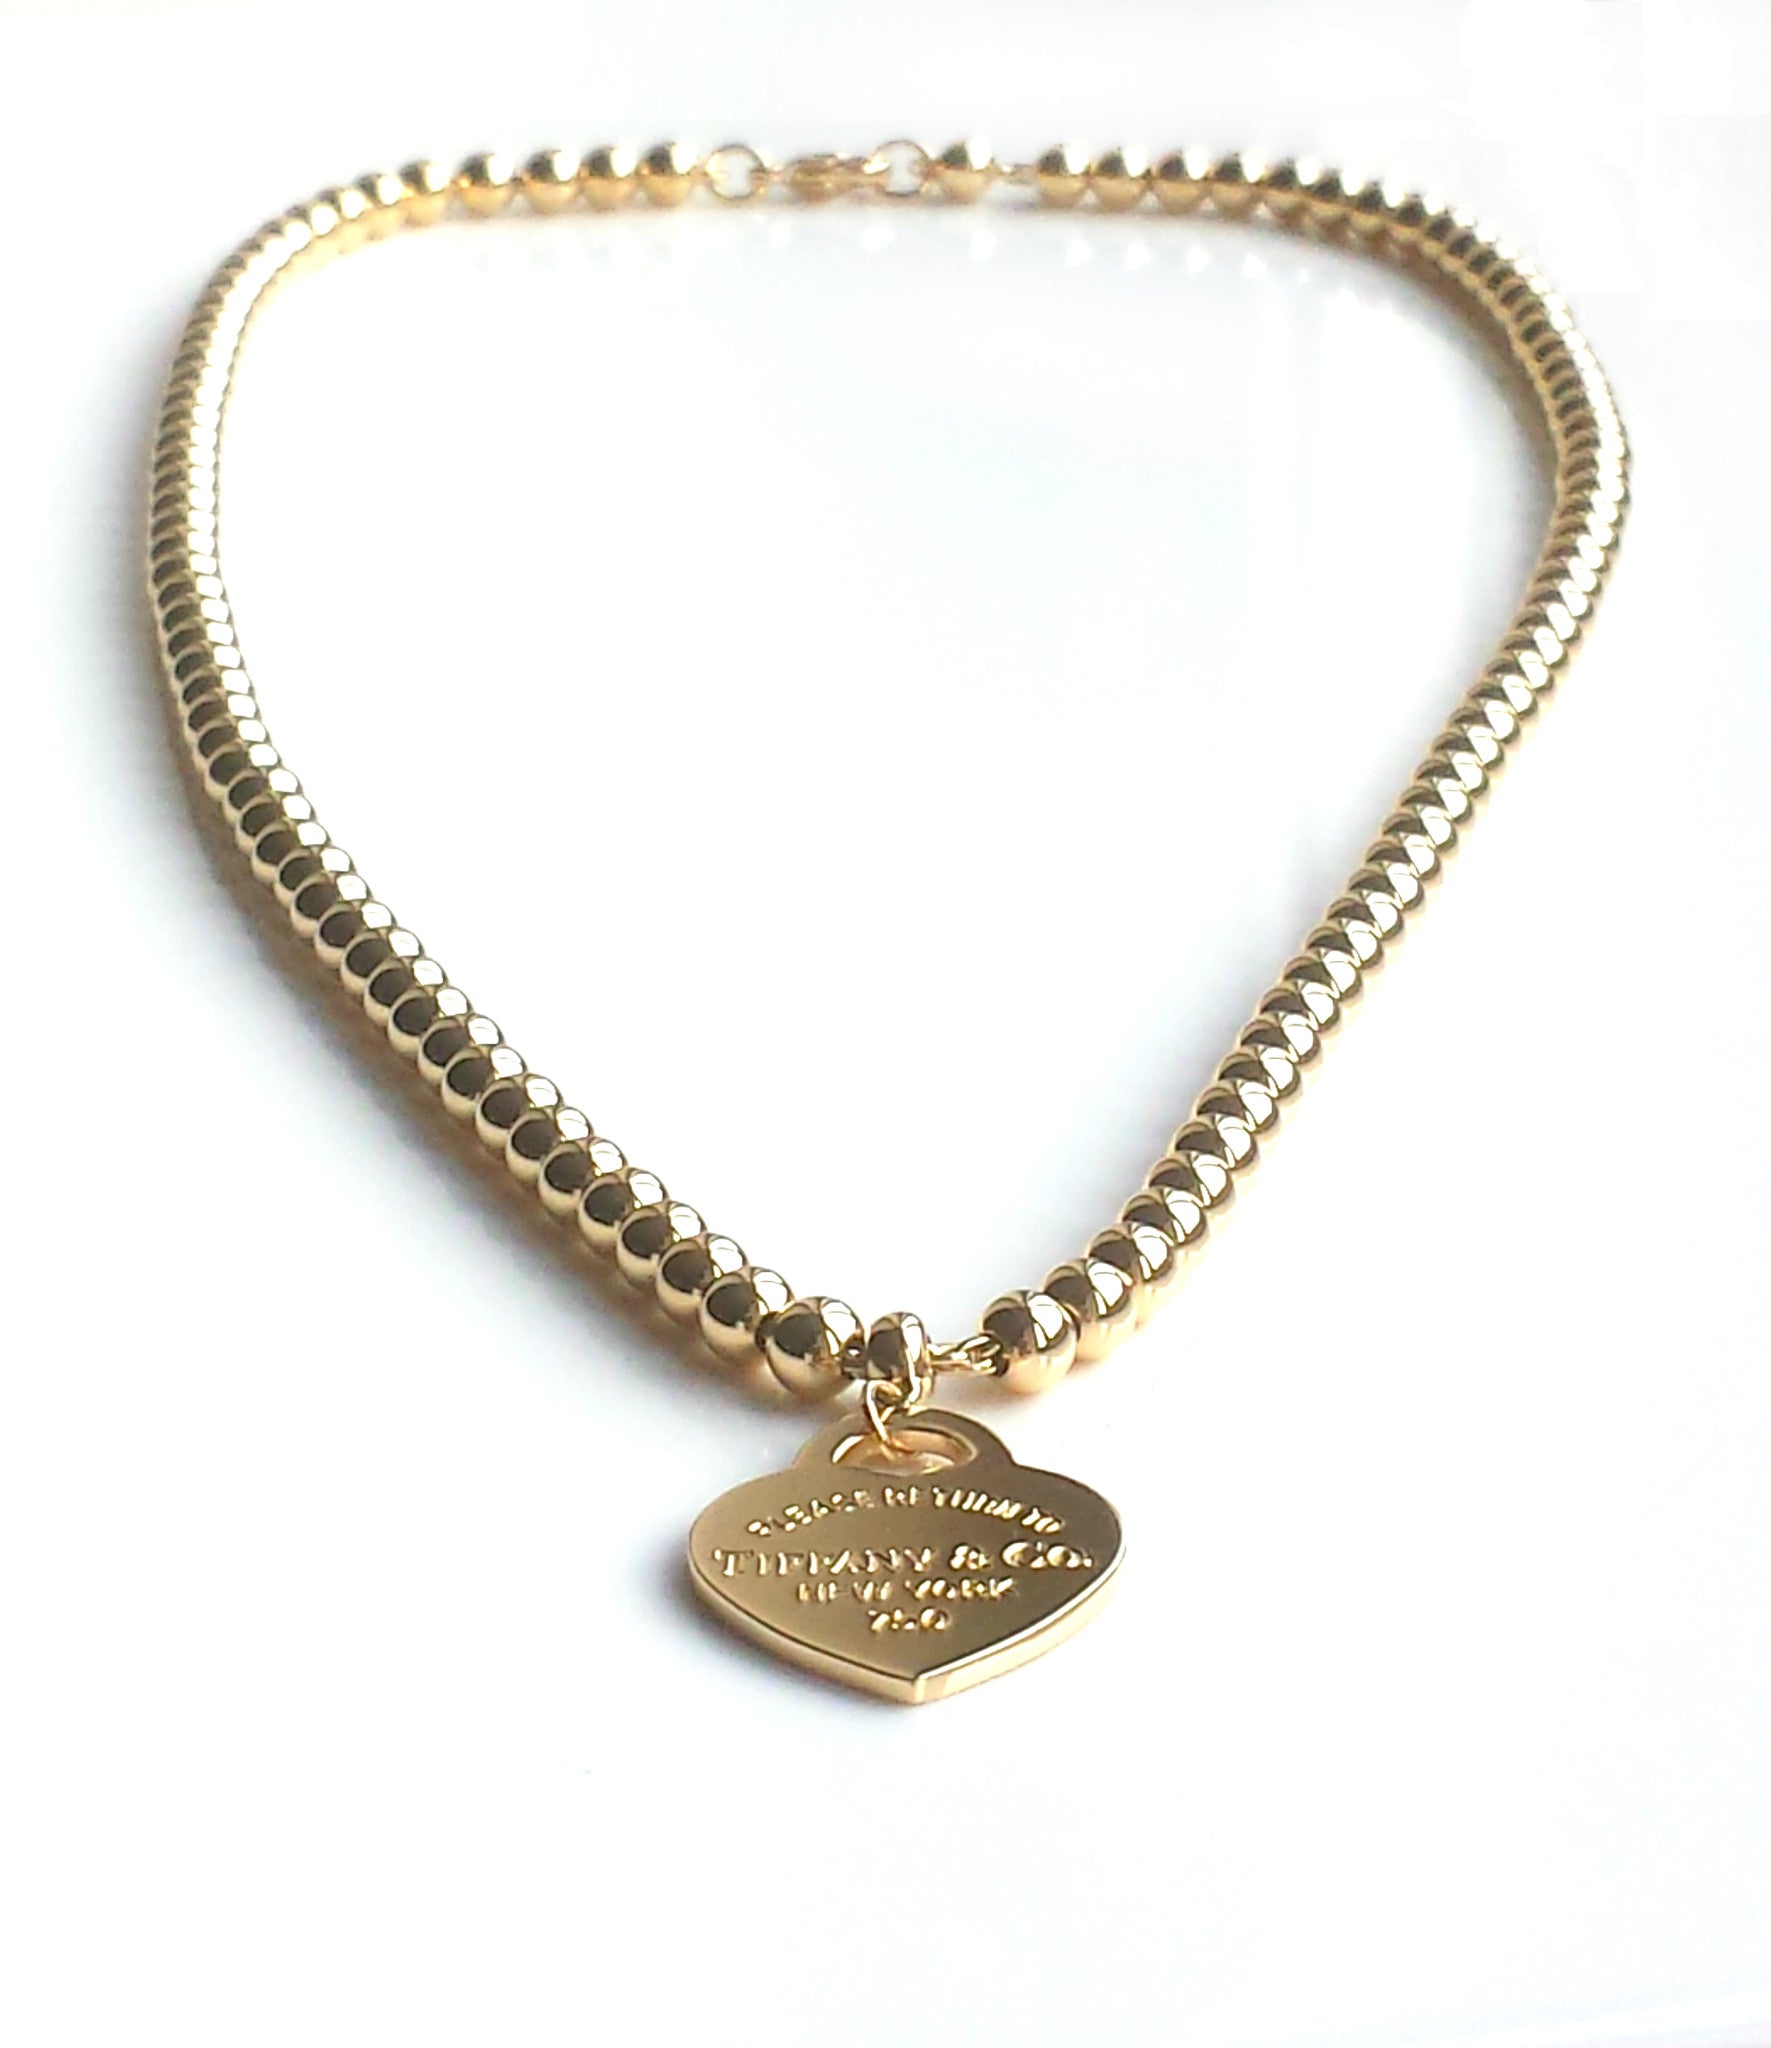 Tiffany & Co. Return to™ 18k Yellow Gold Small Bead Necklace with Heart Tag, 16 inches